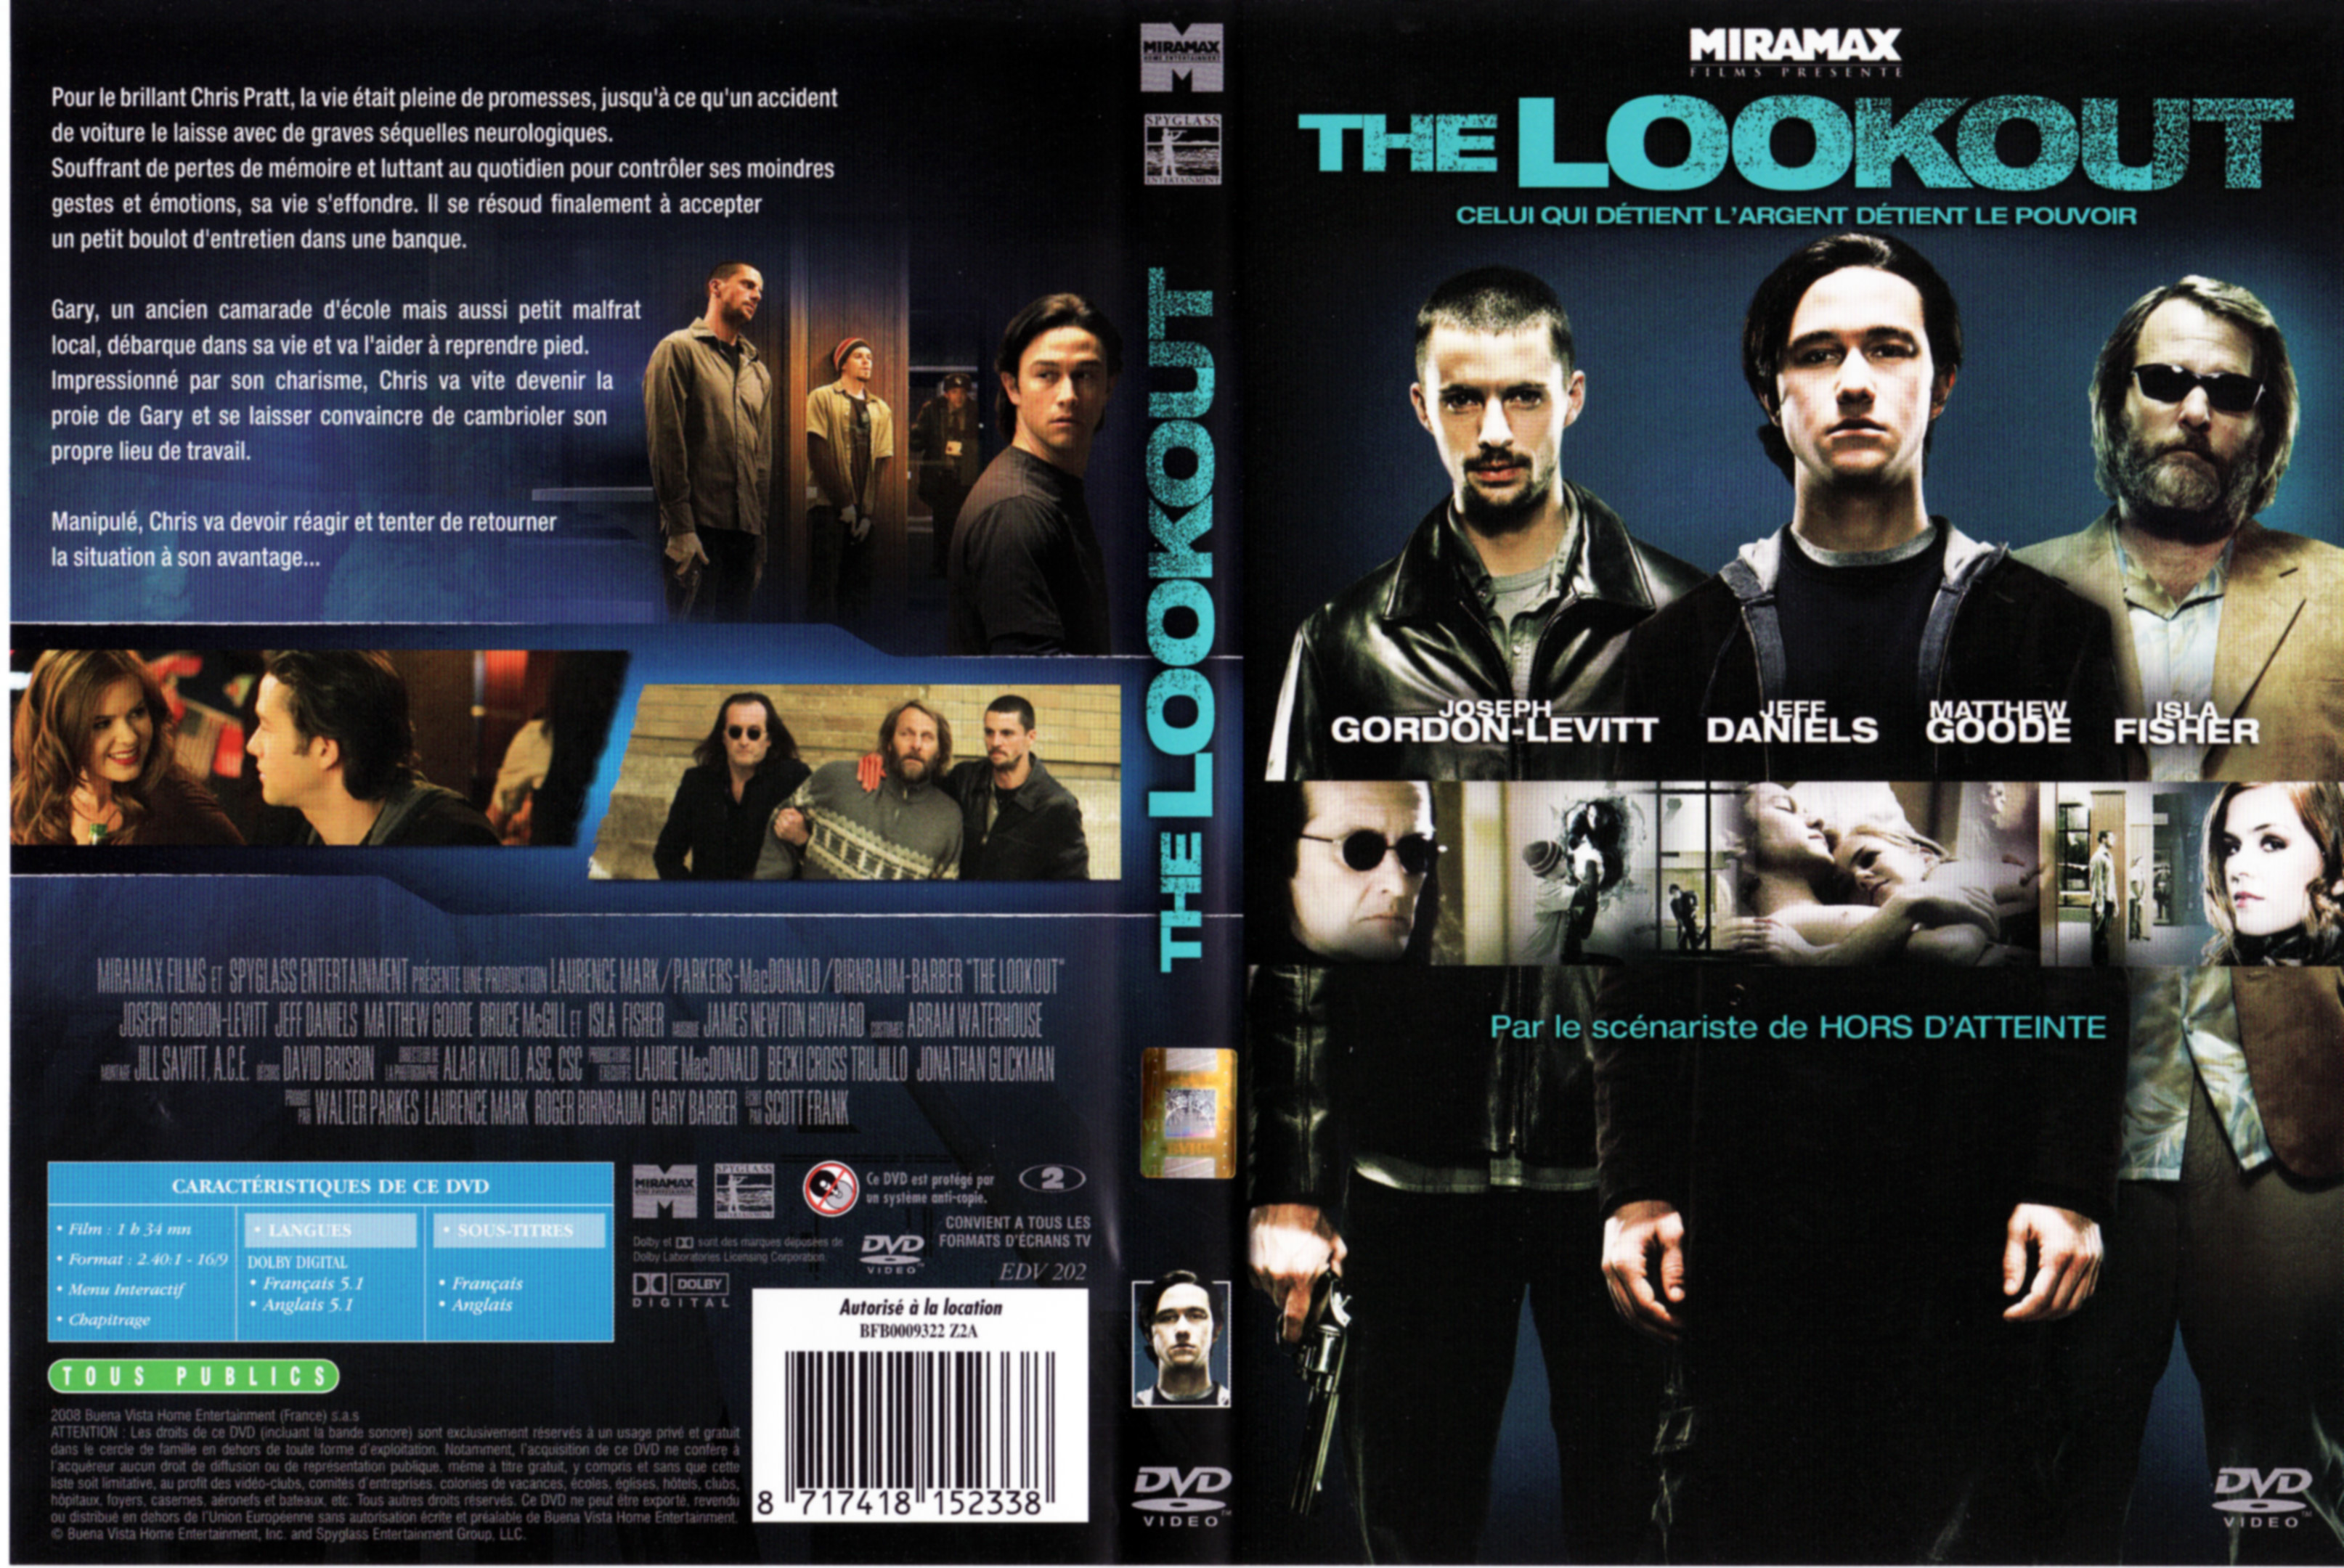 Jaquette DVD The lookout v2